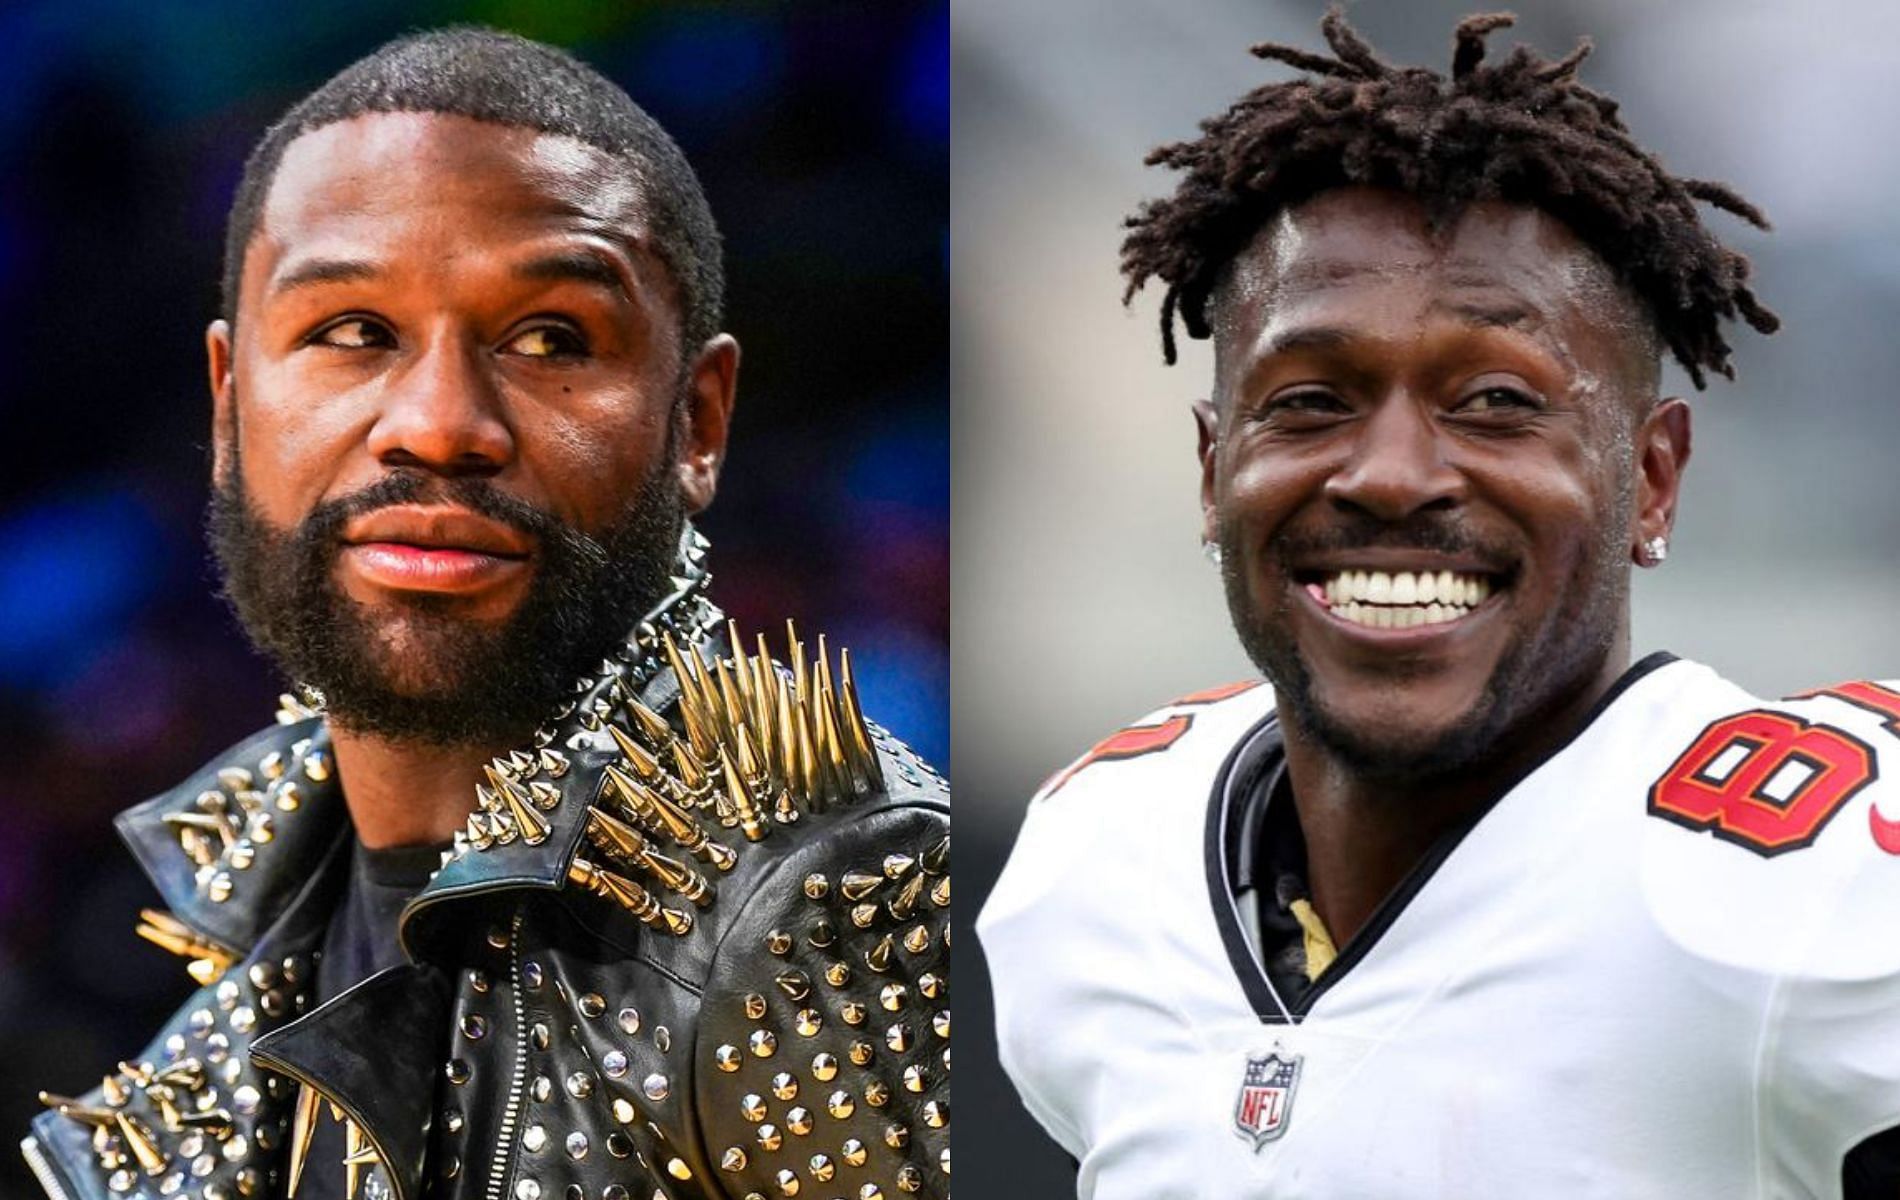 Floyd Mayweather (left) and Antonio Brown (right)